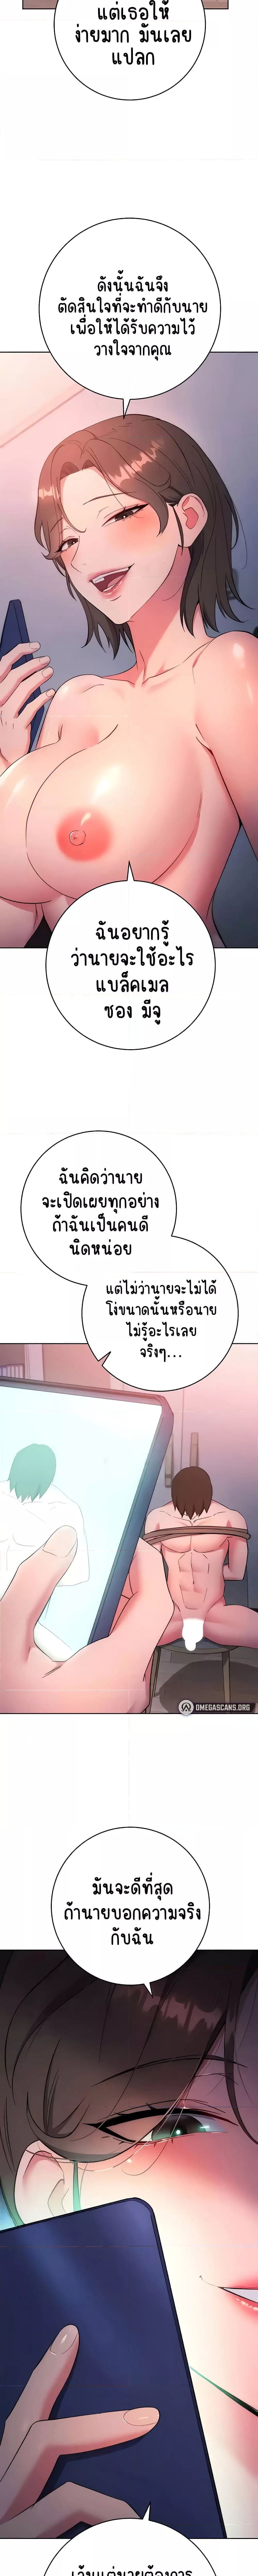 Outsider: The Invisible Man ตอนที่ 8 ภาพ 19